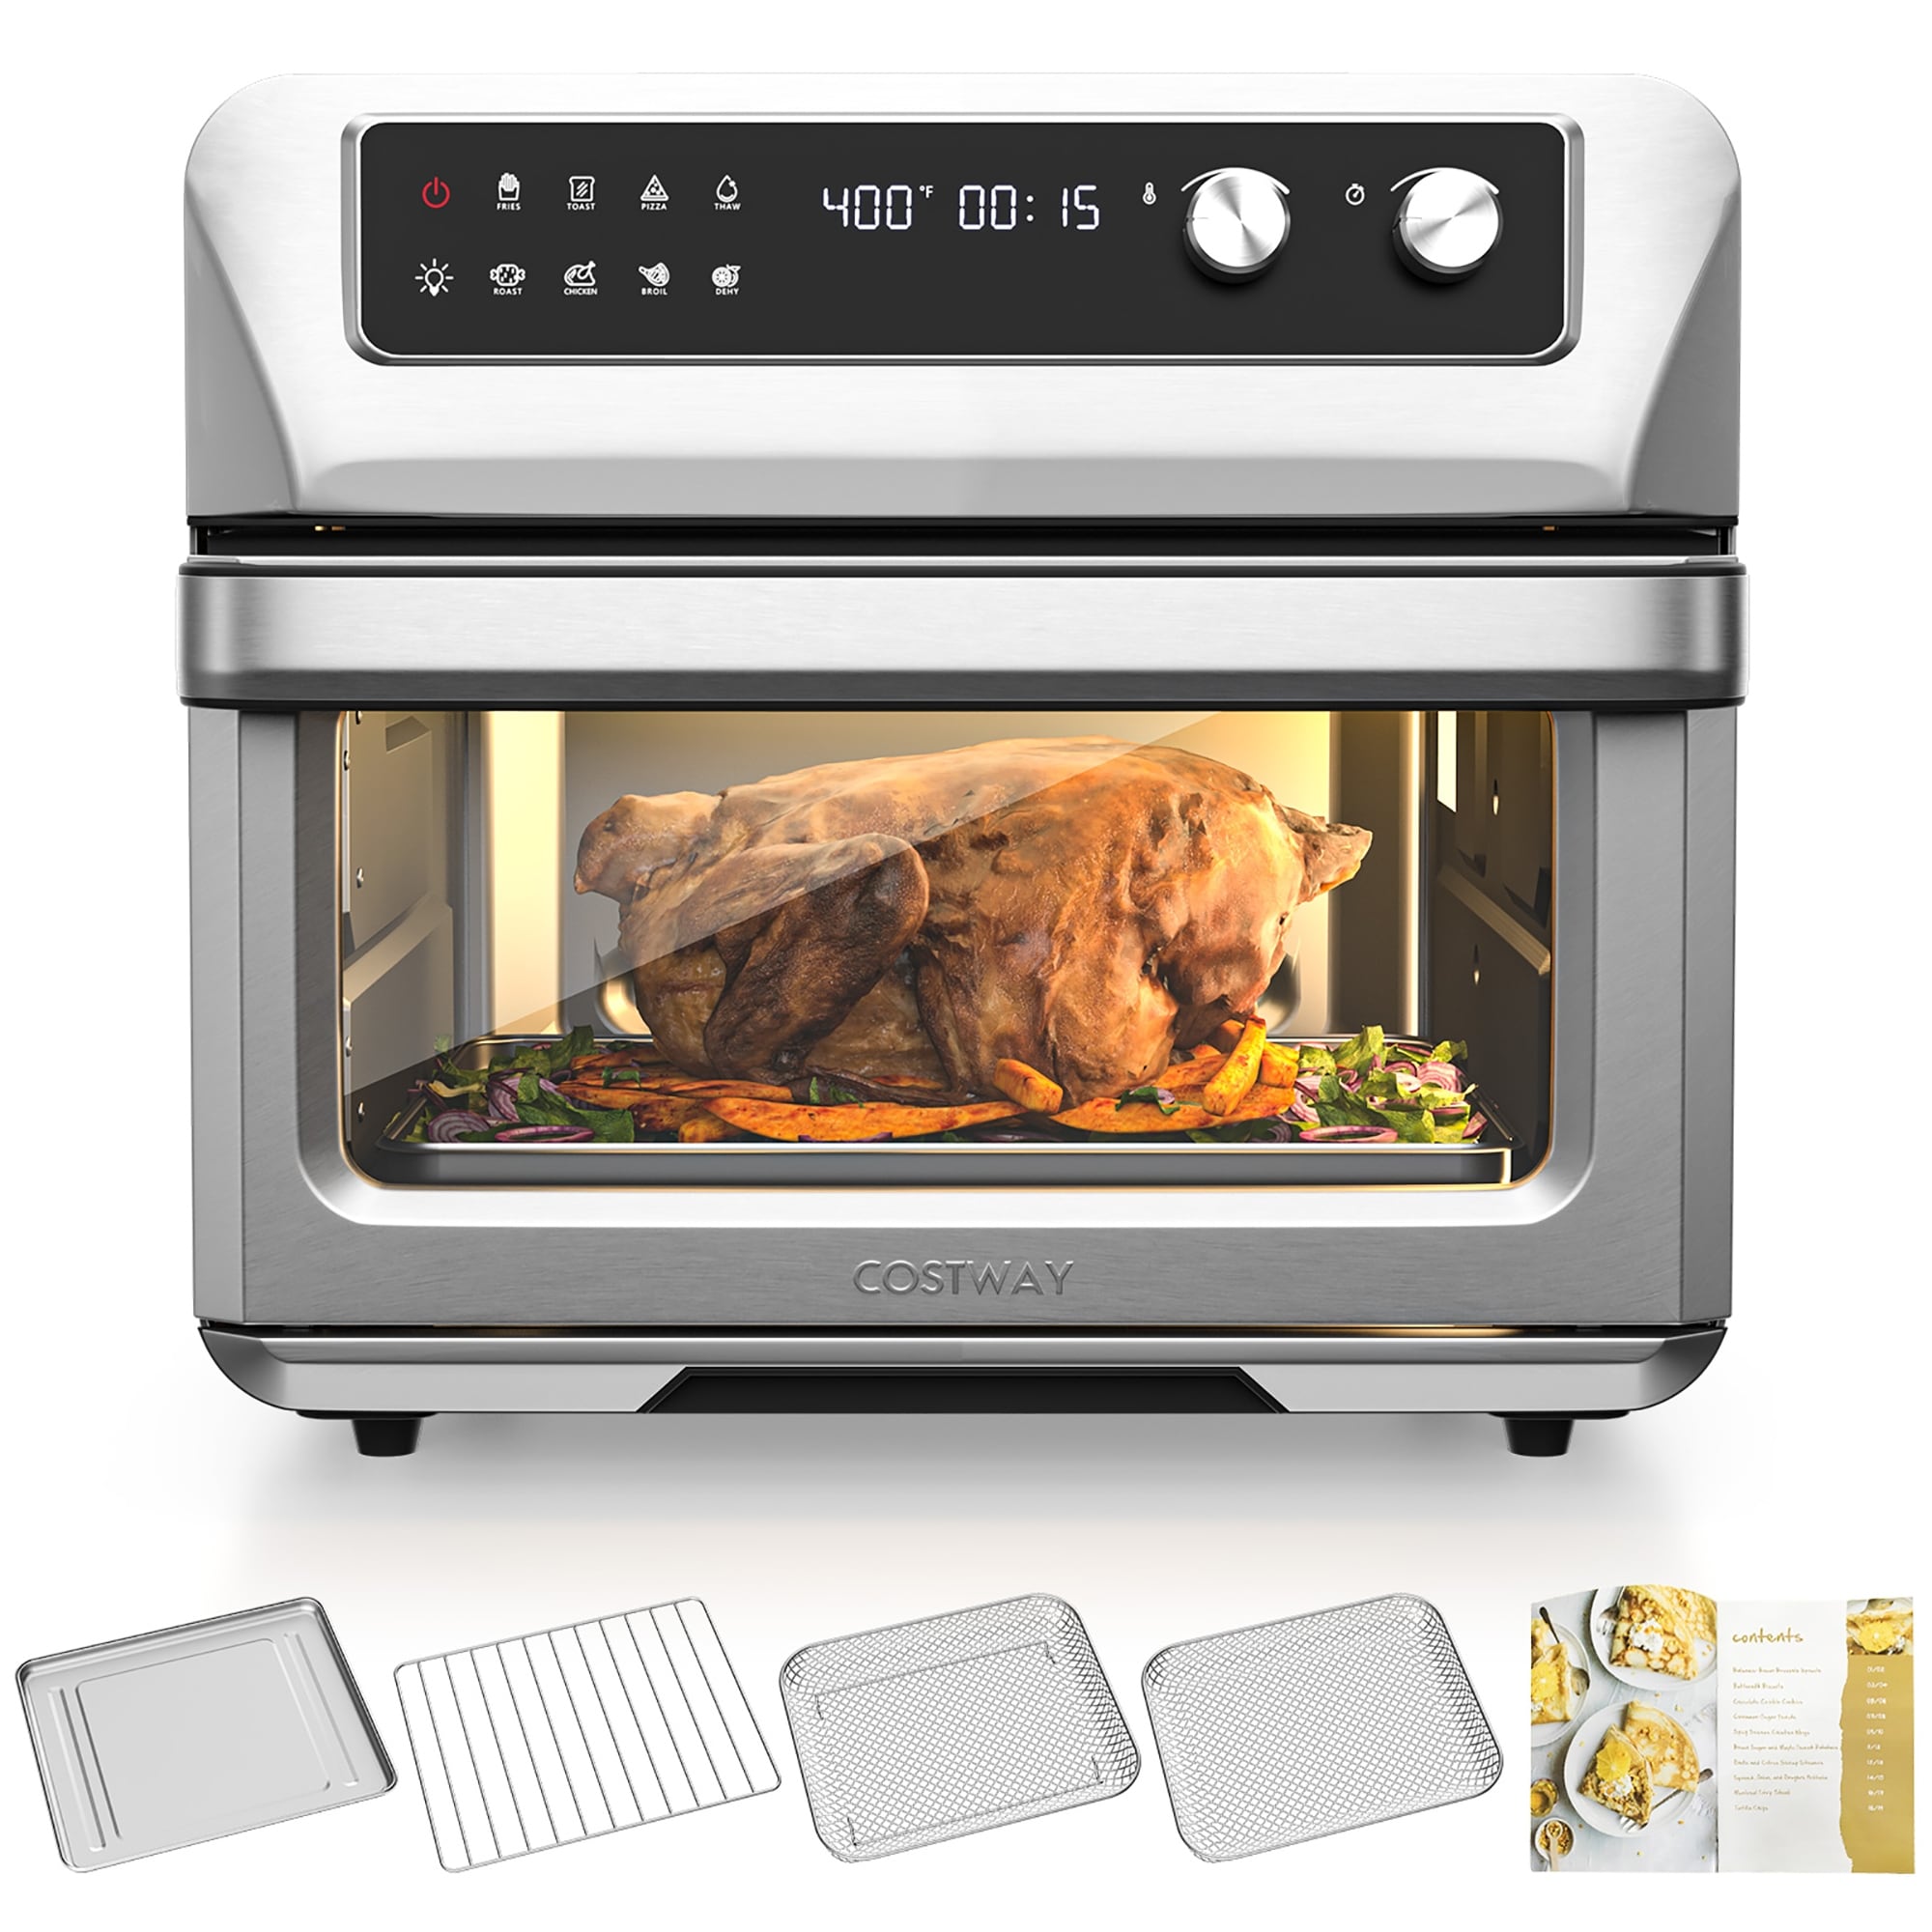 https://ak1.ostkcdn.com/images/products/is/images/direct/16c23bc90e8d873bfdc5c99287ef3dc64e89afe9/Costway-21QT-Convection-Air-Fryer-Toaster-Oven-8-in-1-w--5-Accessories.jpg